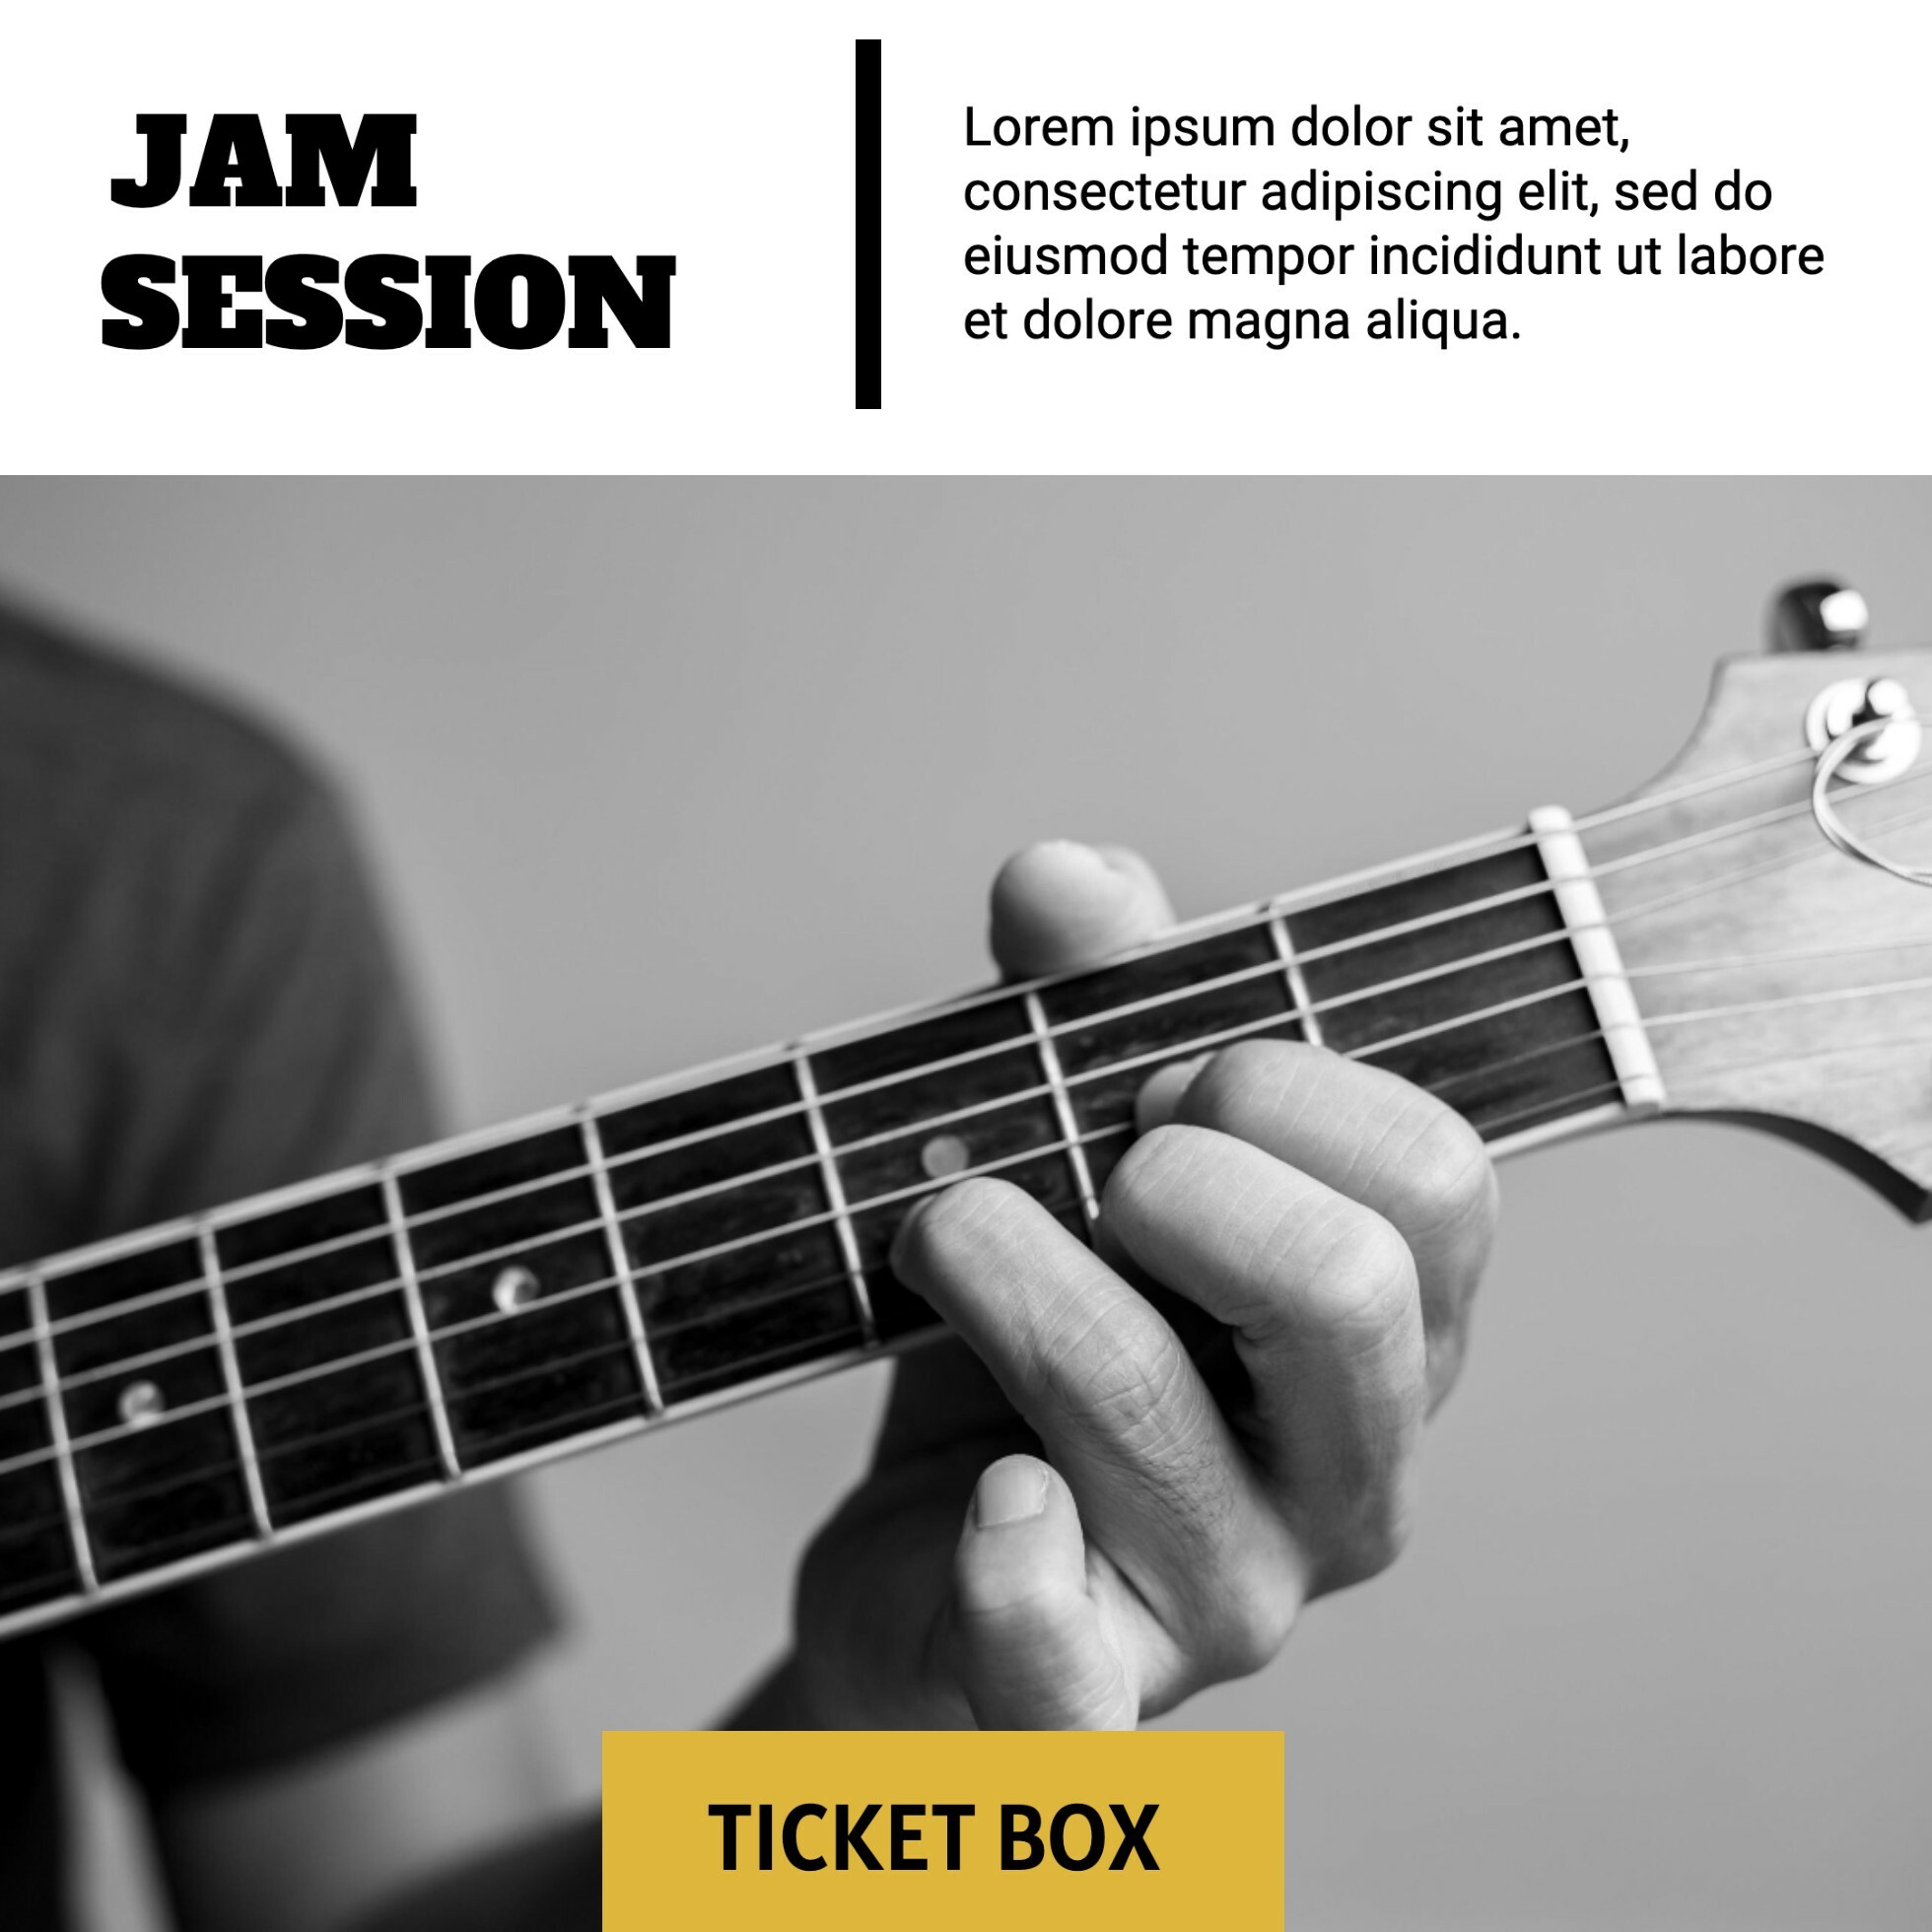 Jam Session template